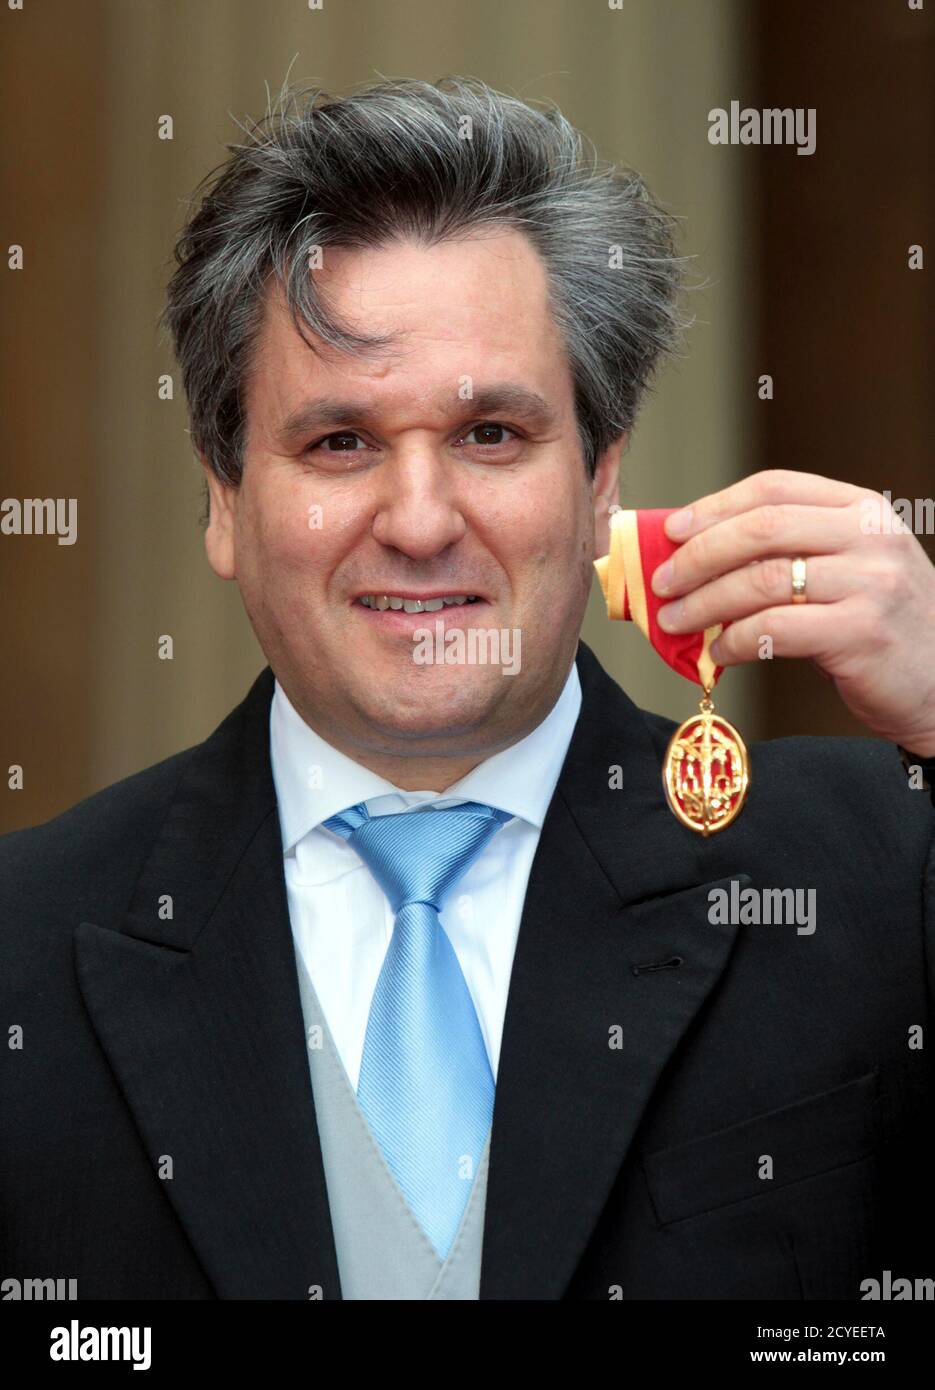 Royal Opera House Music Director, Antonio Pappano, poses with his Knighthood after being knighted by Britain's Prince Charles at Buckingham Palace in London May 15, 2012.    REUTERS/Sean Dempsey/pool    (BRITAIN - Tags: ROYALS ENTERTAINMENT SOCIETY) Stock Photo